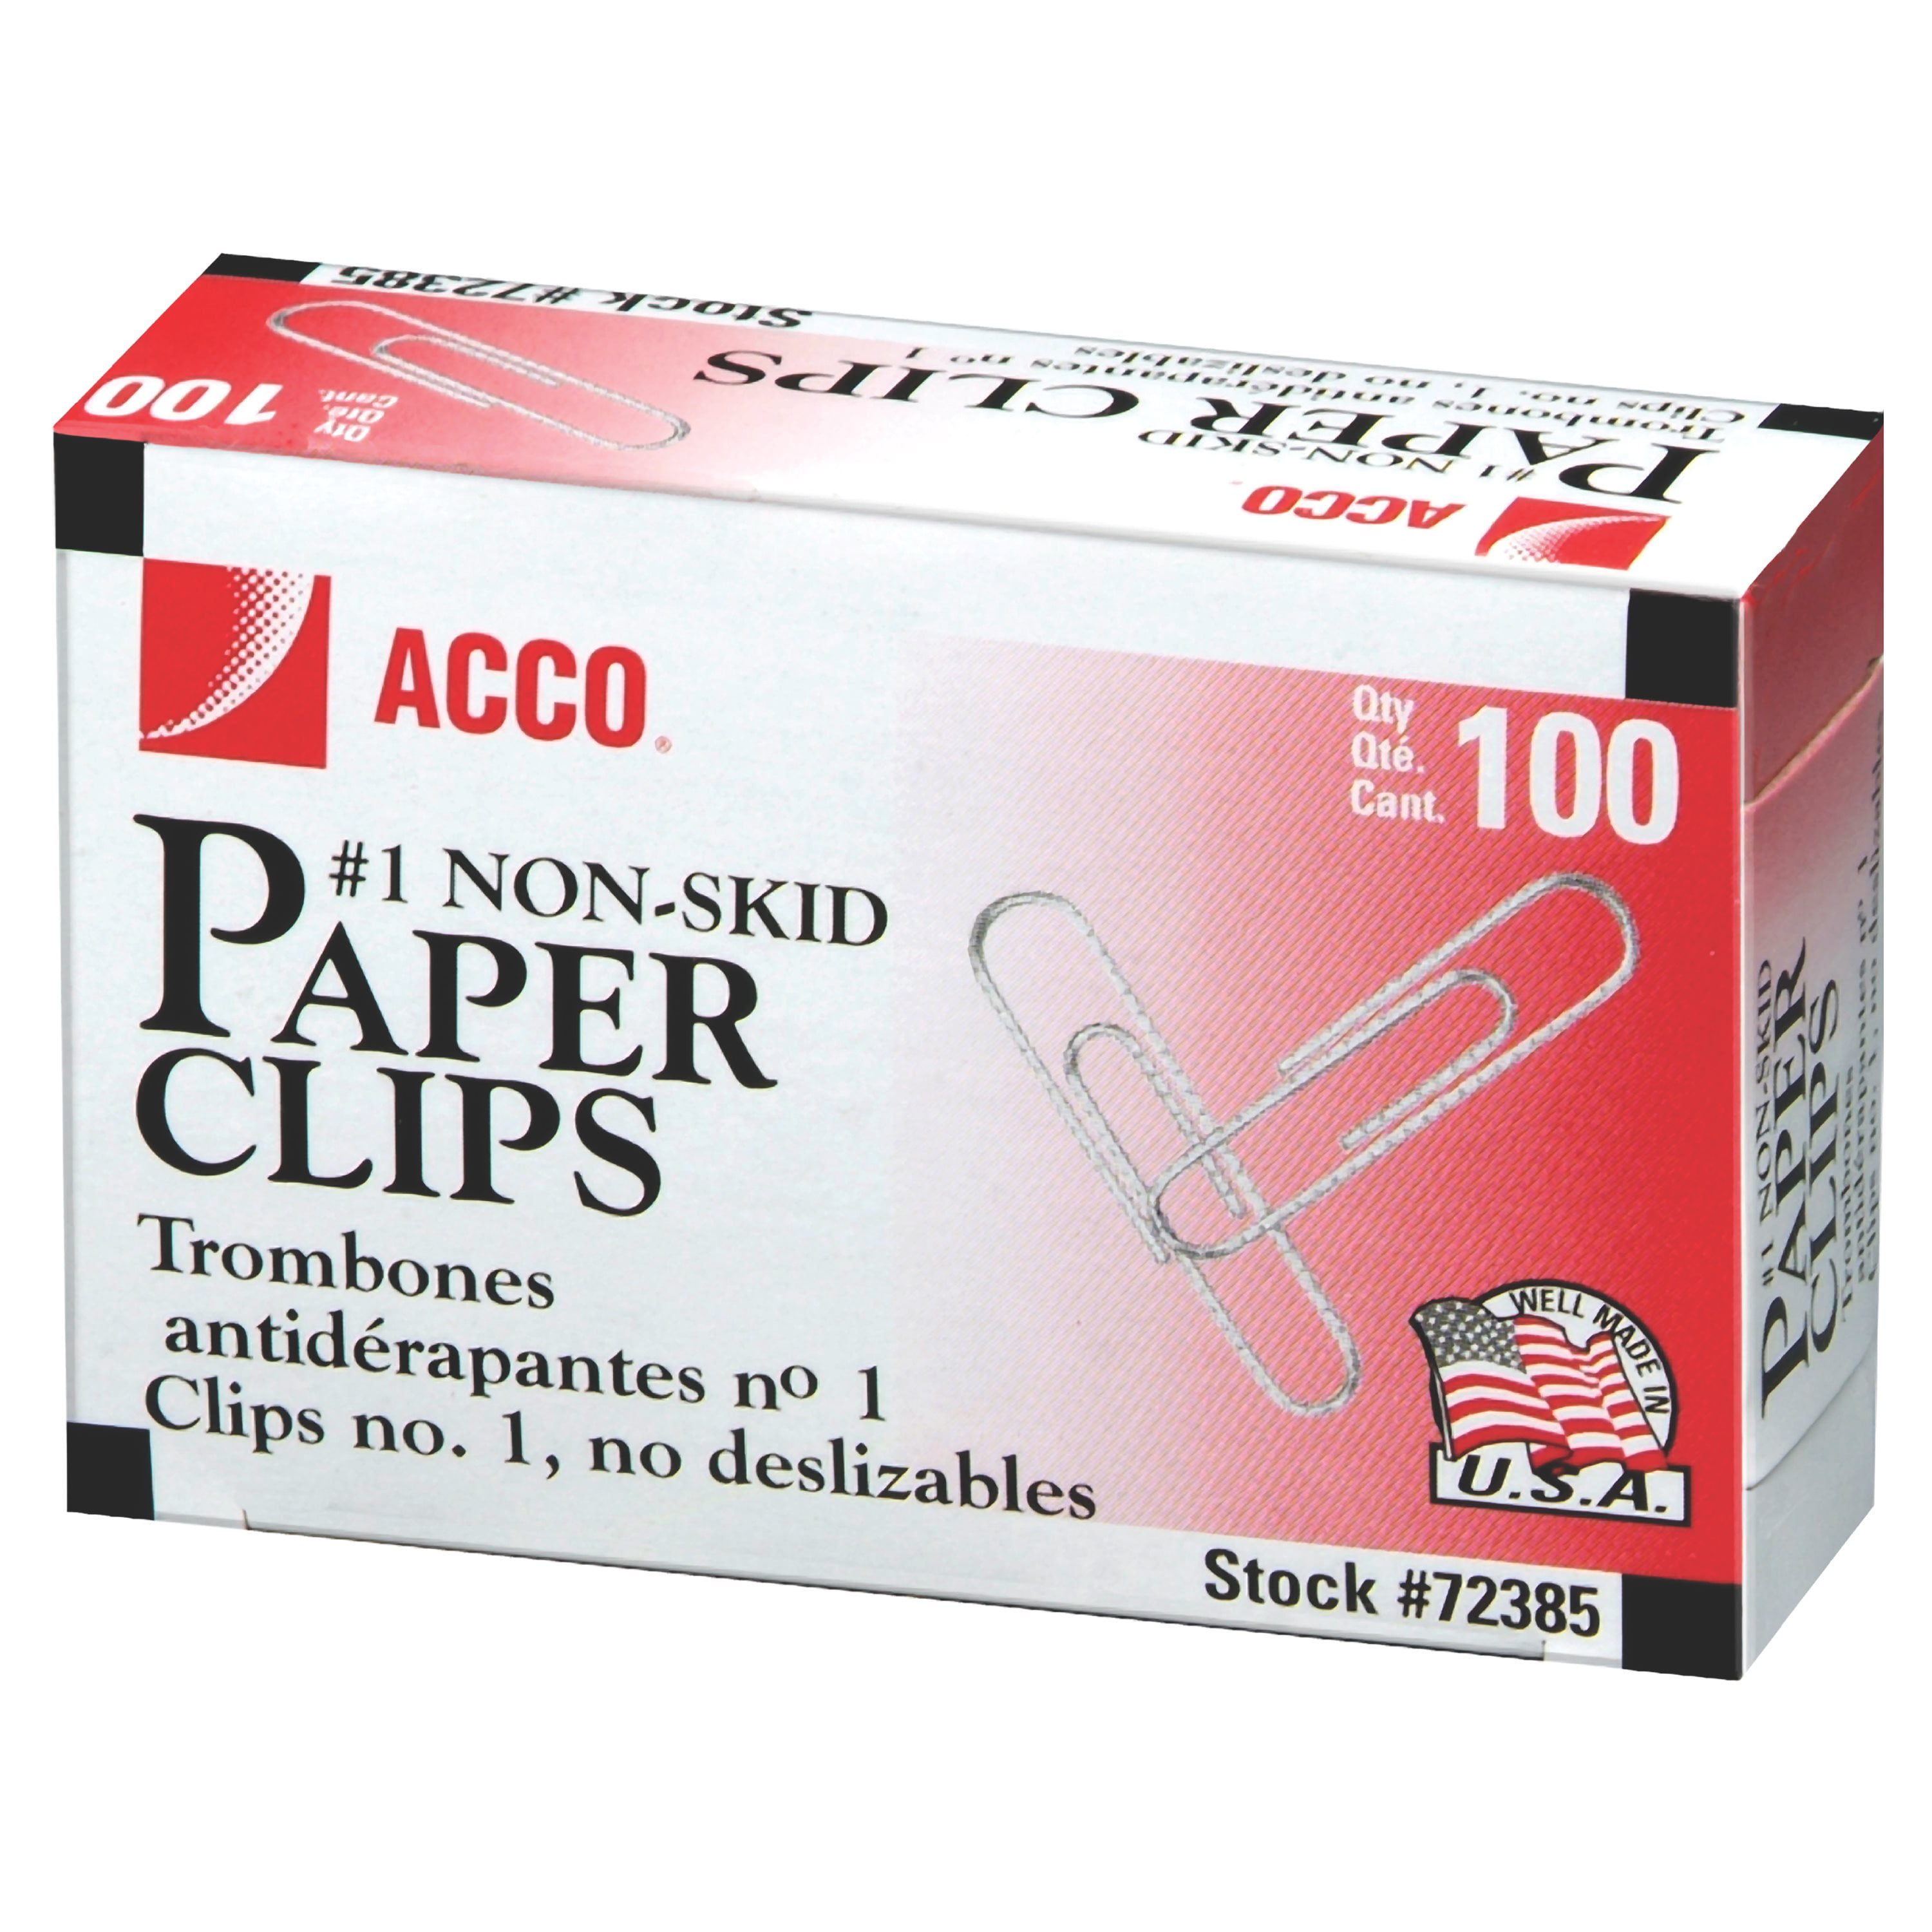 Details about   ACCO Paper Clips 100/Box 1 Case 50 Boxes/Case Jumbo A70... Economy Smooth 